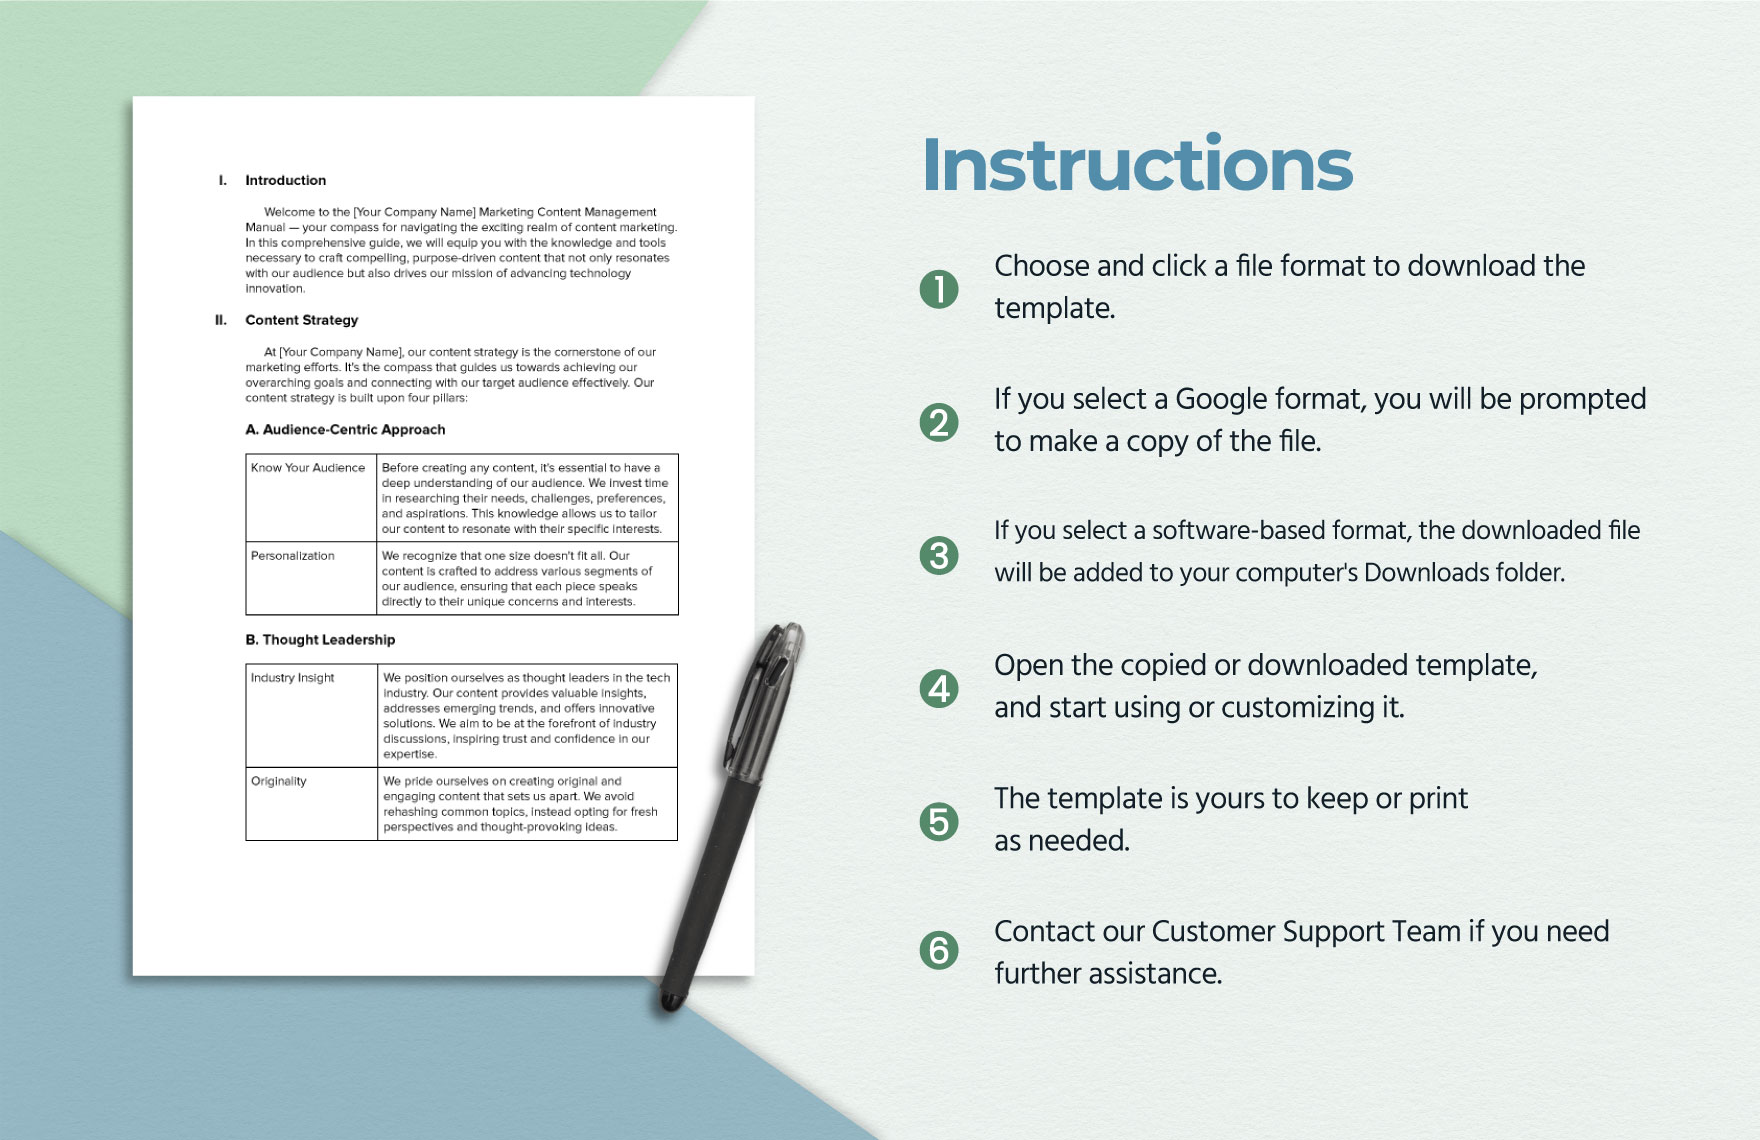 Marketing Content Management Manual Template